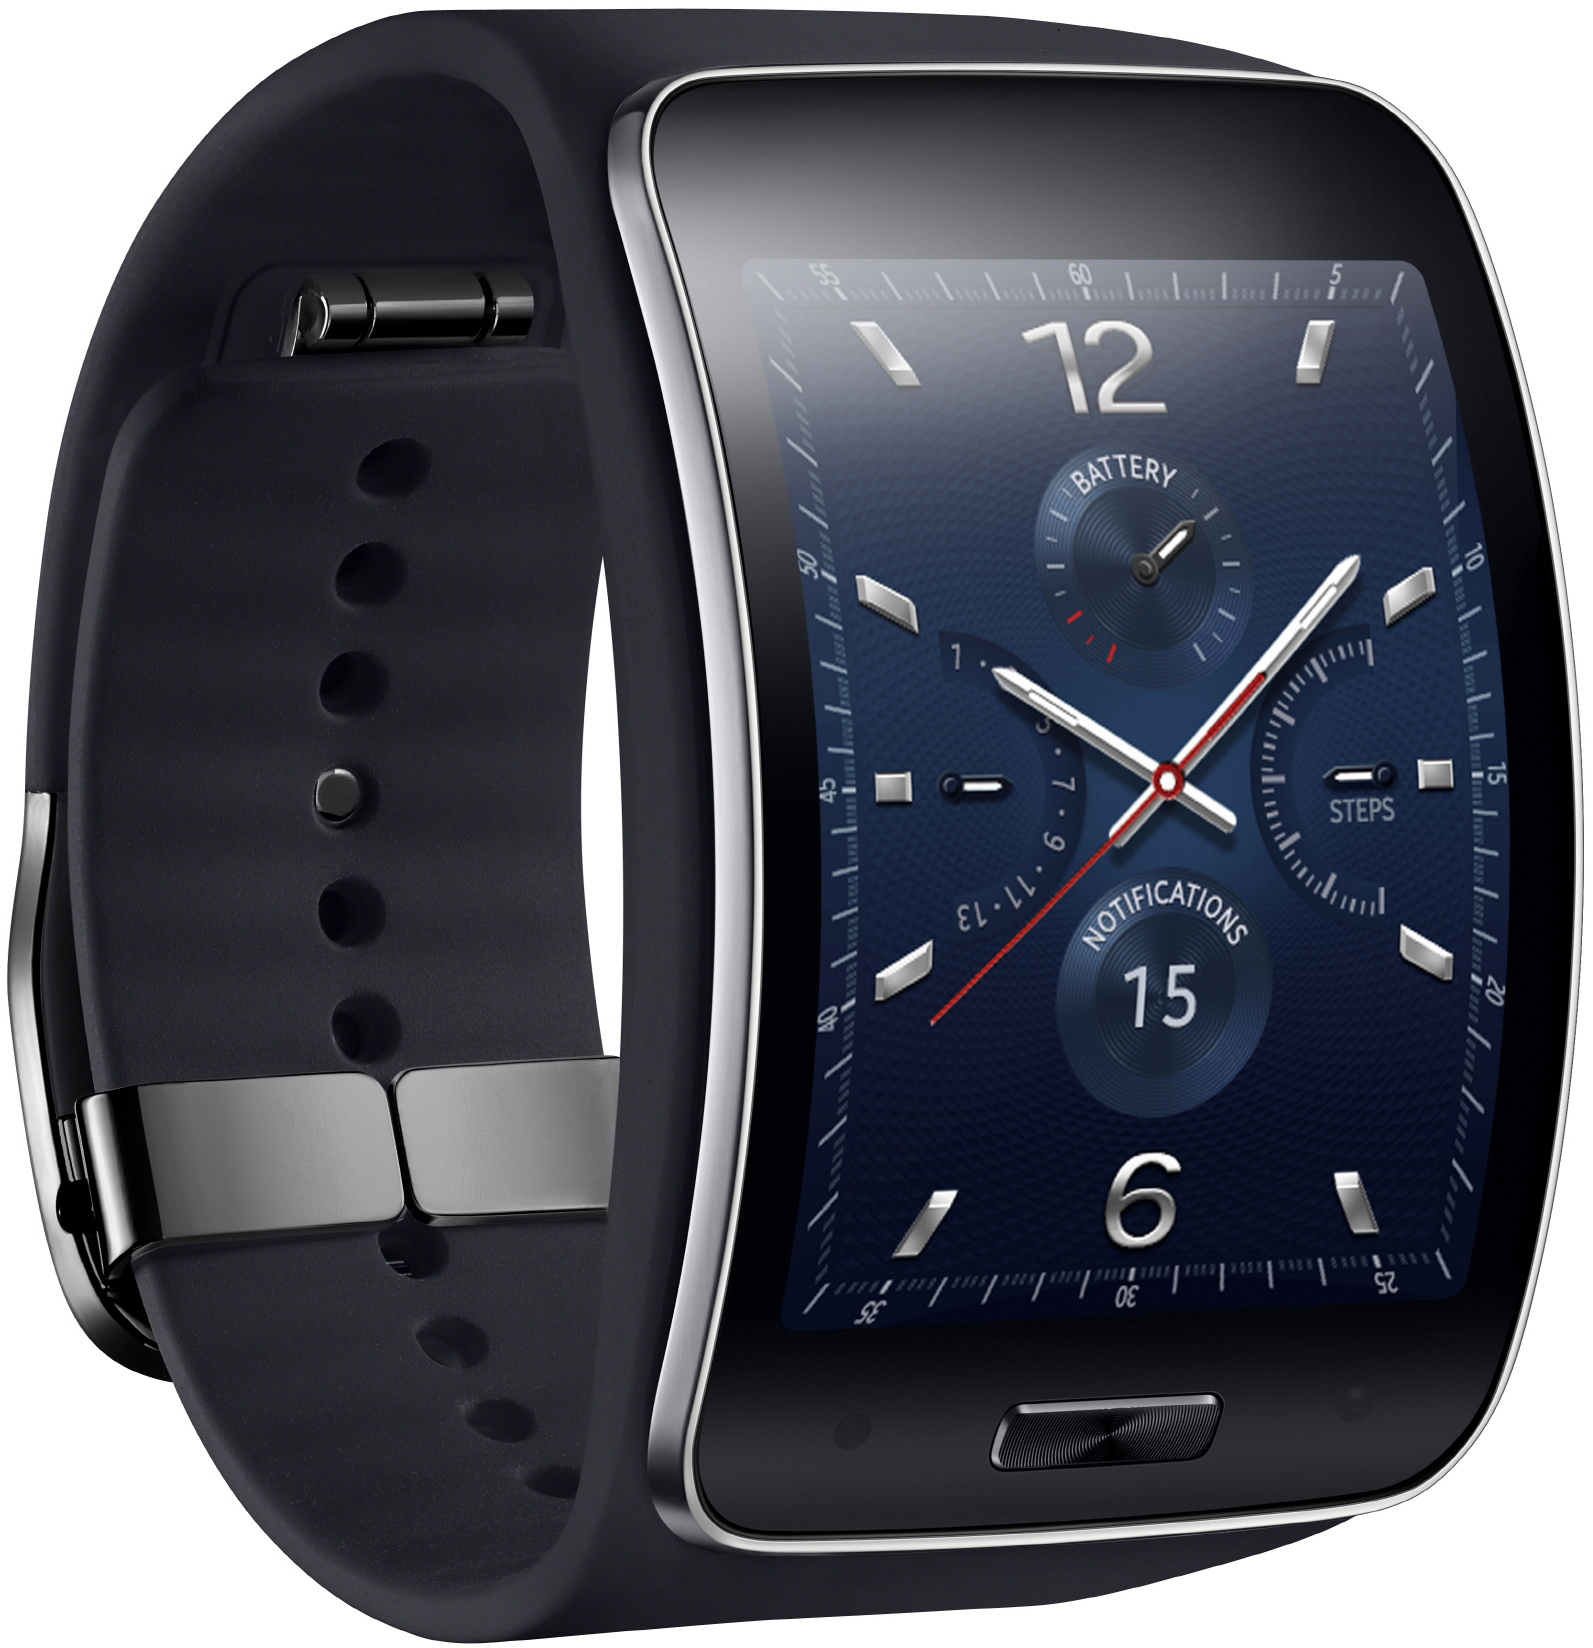 Samsung introduces smartwatch with phone capabilities, curved display ...